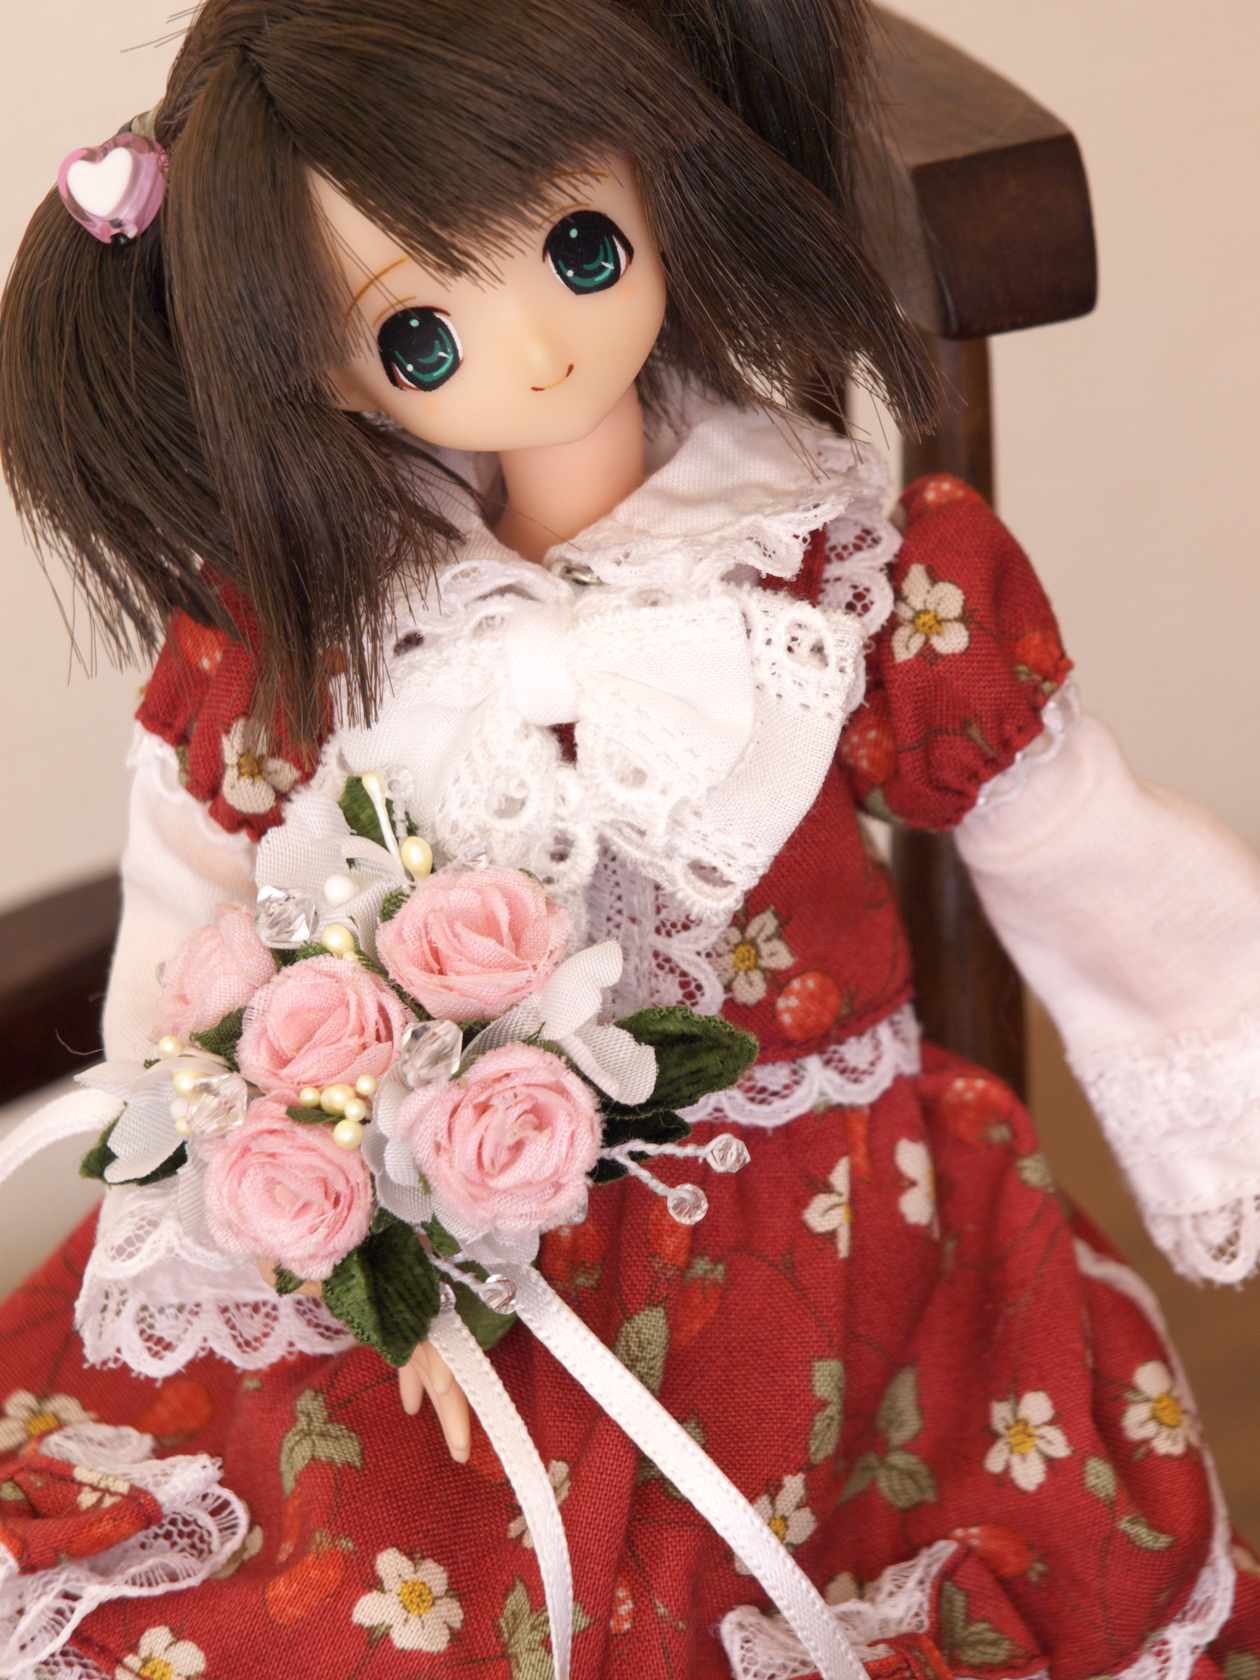 doll sitting on chair with pink flowers and a flower bouquet